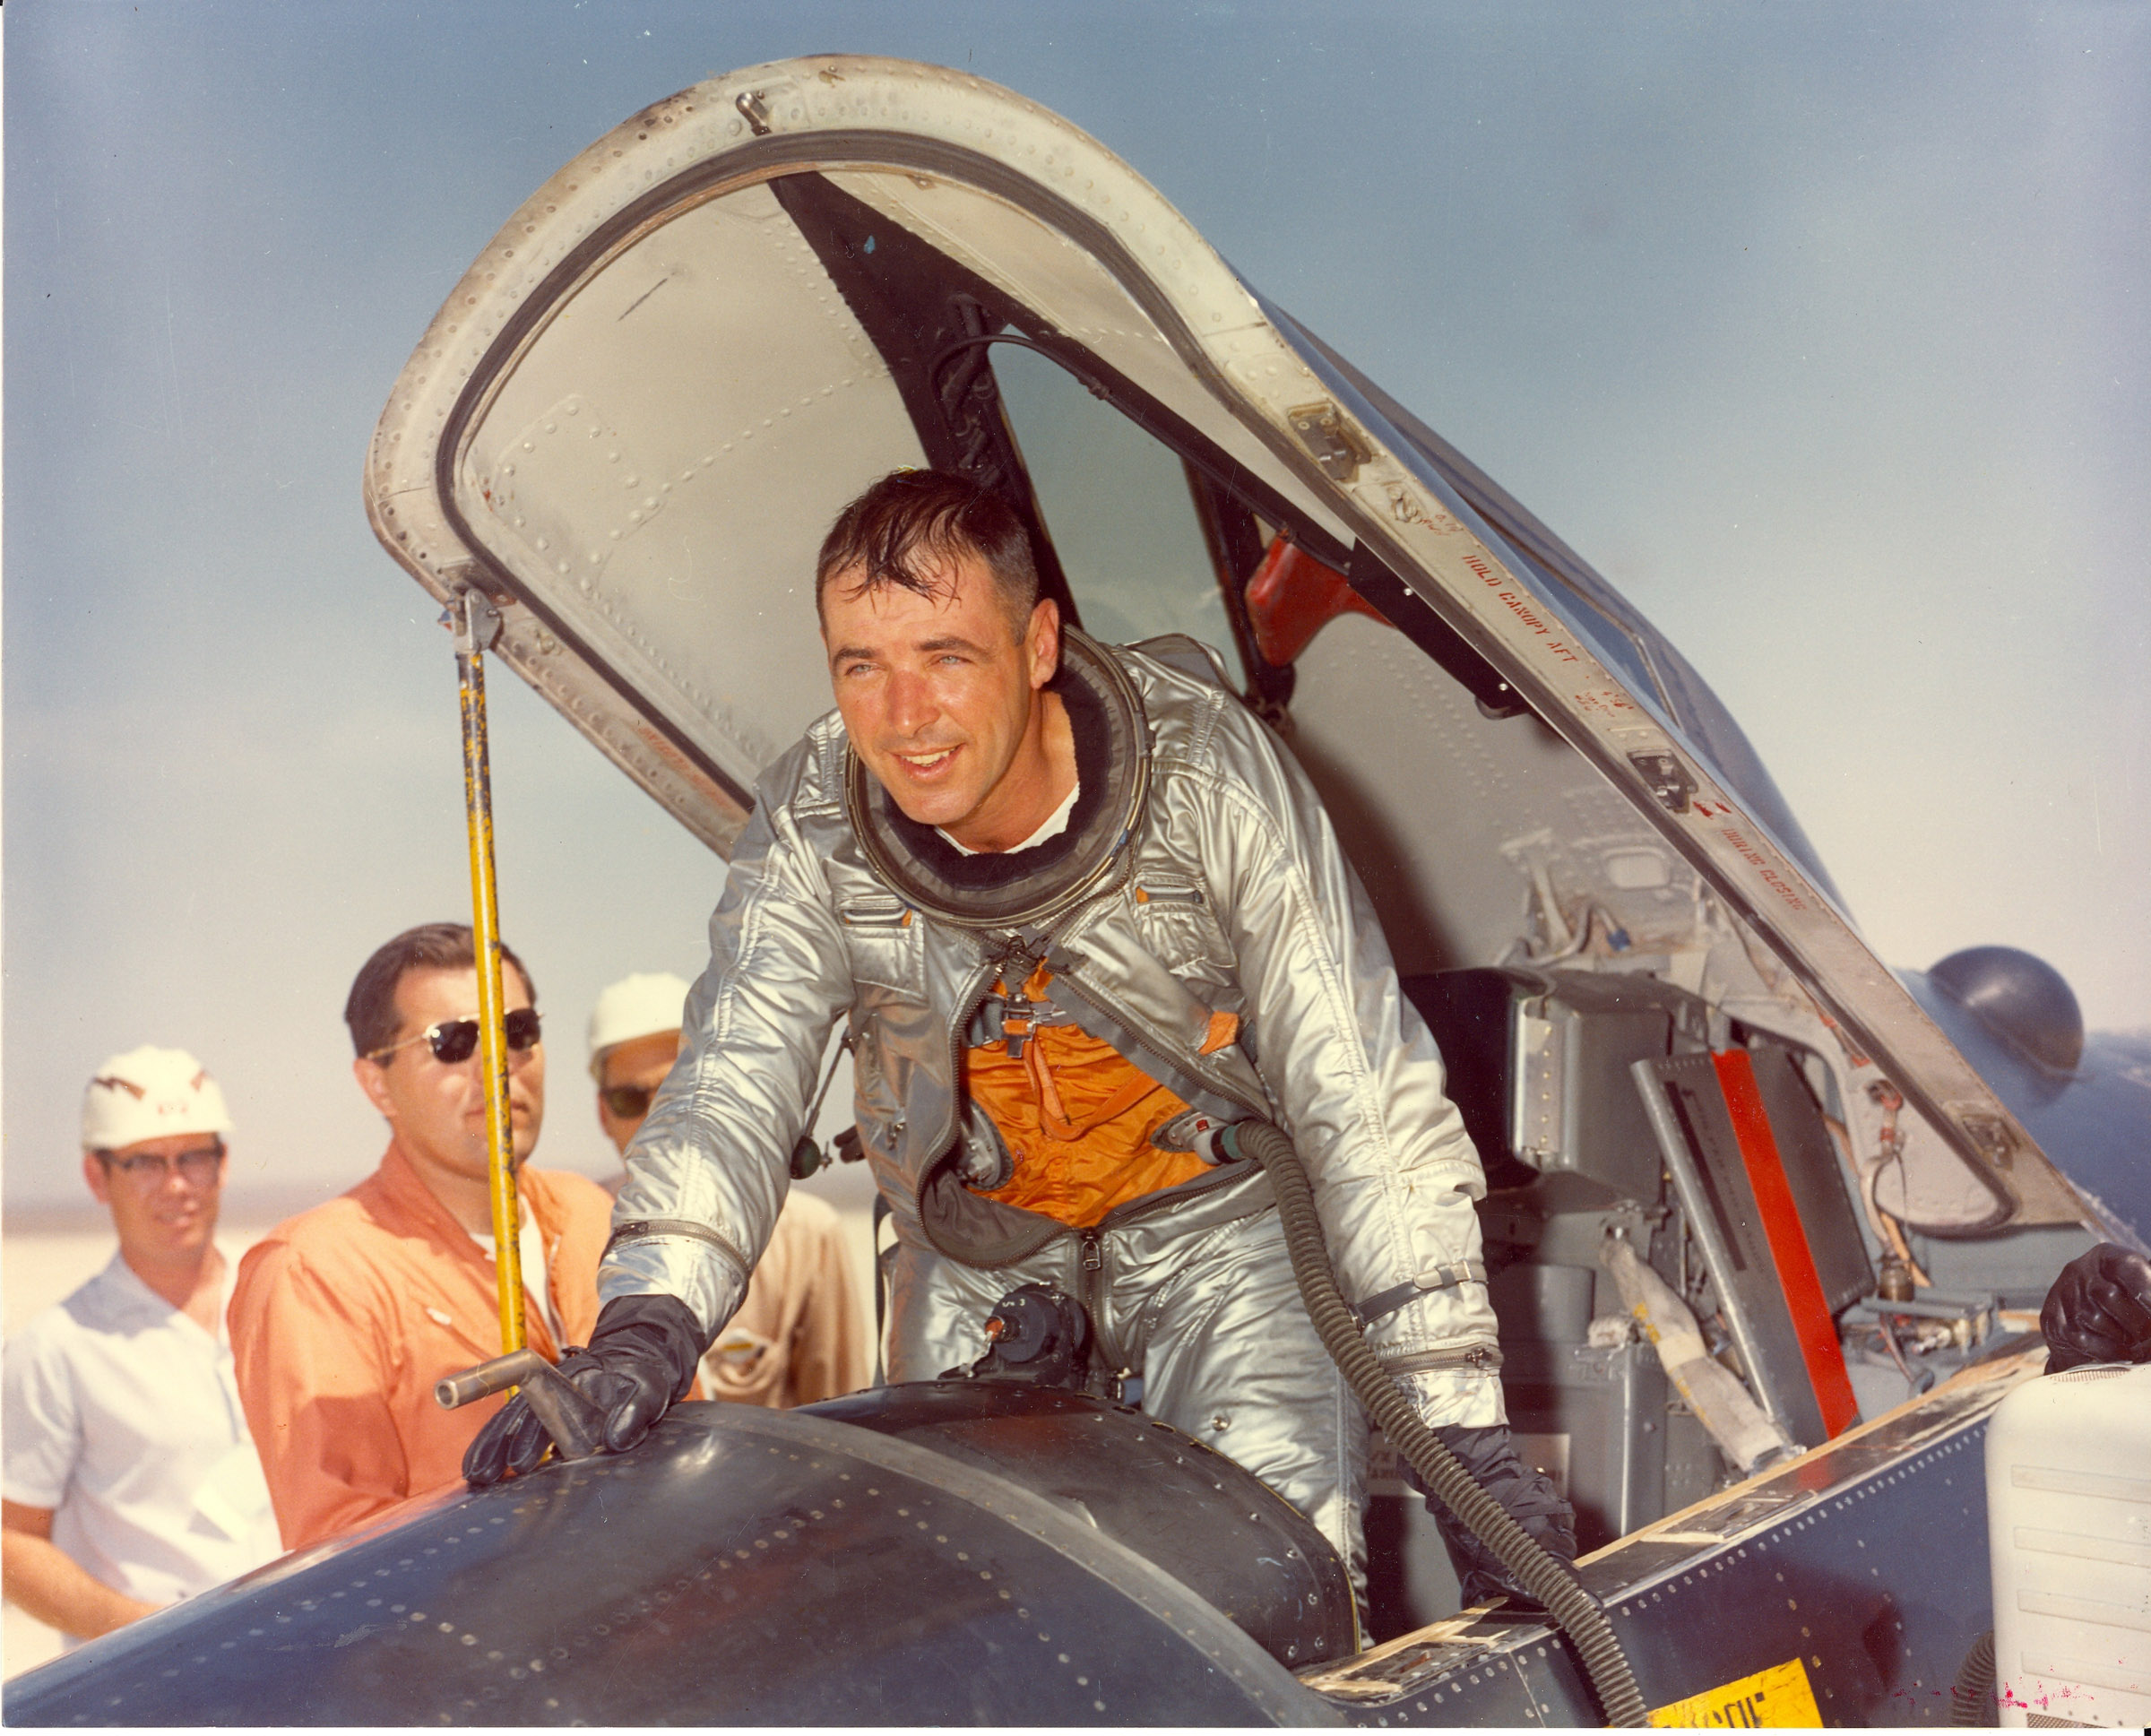 General Robert White: The first winged astronaut